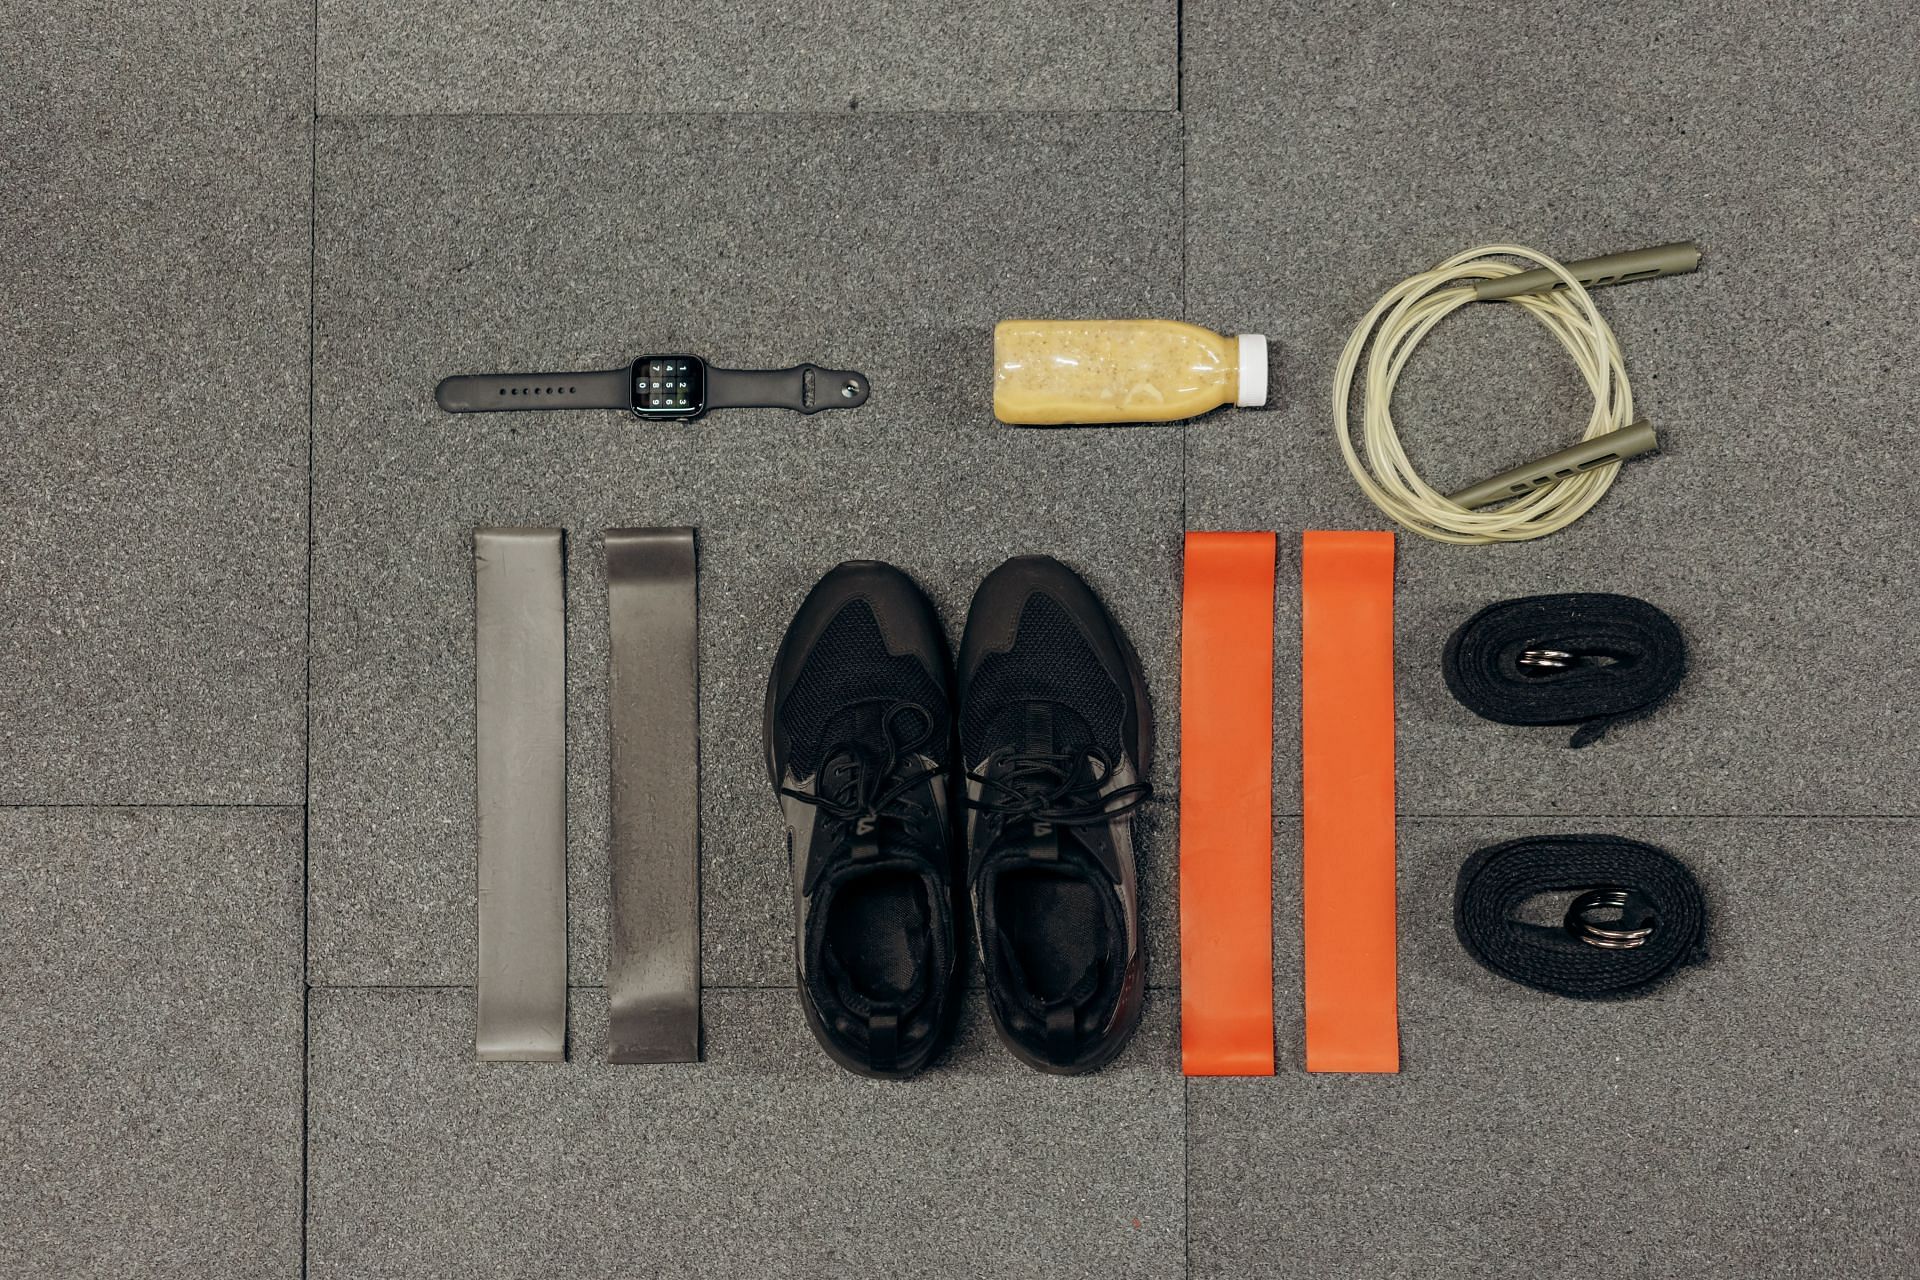 Best equipments to create your own home gym for weight training. (Image by Mikhail Nilov / Pexels)